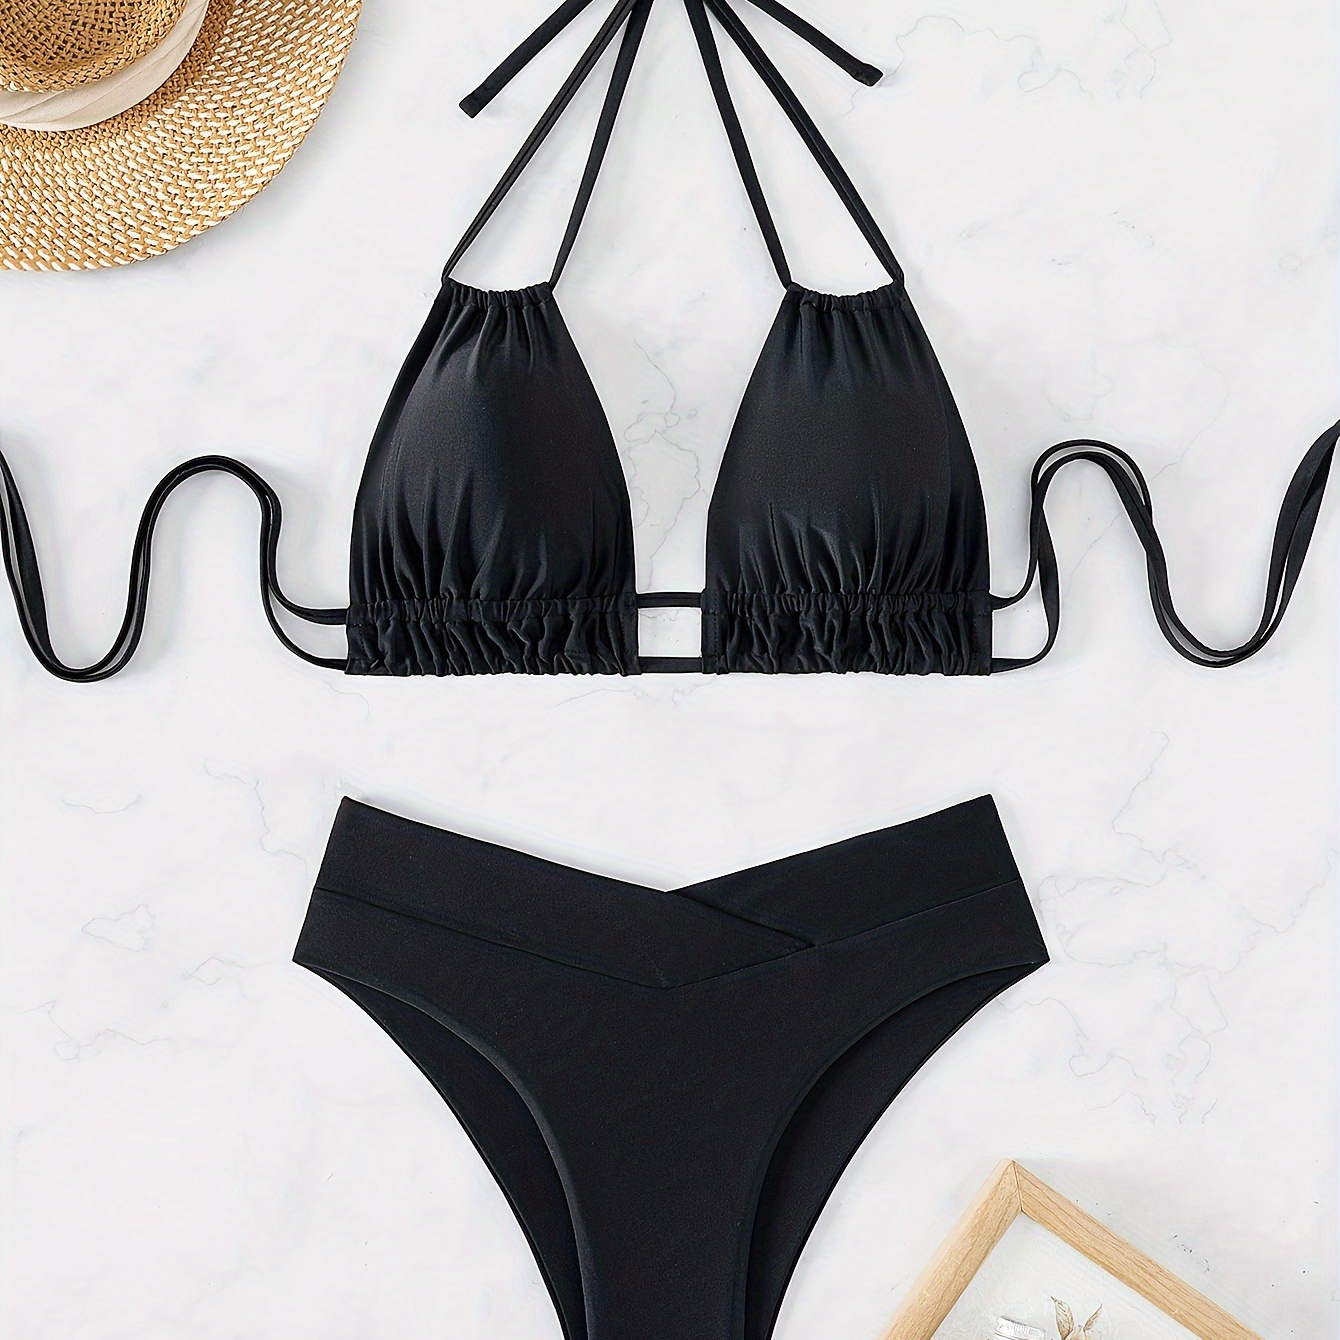 

Black Halter Tie Neck 2 Piece Set Bikini, Crossover High Waist V Neck Solid Color Stretchy Swimsuit For Beach Pool Bathing, Women's Swimwear & Clothing